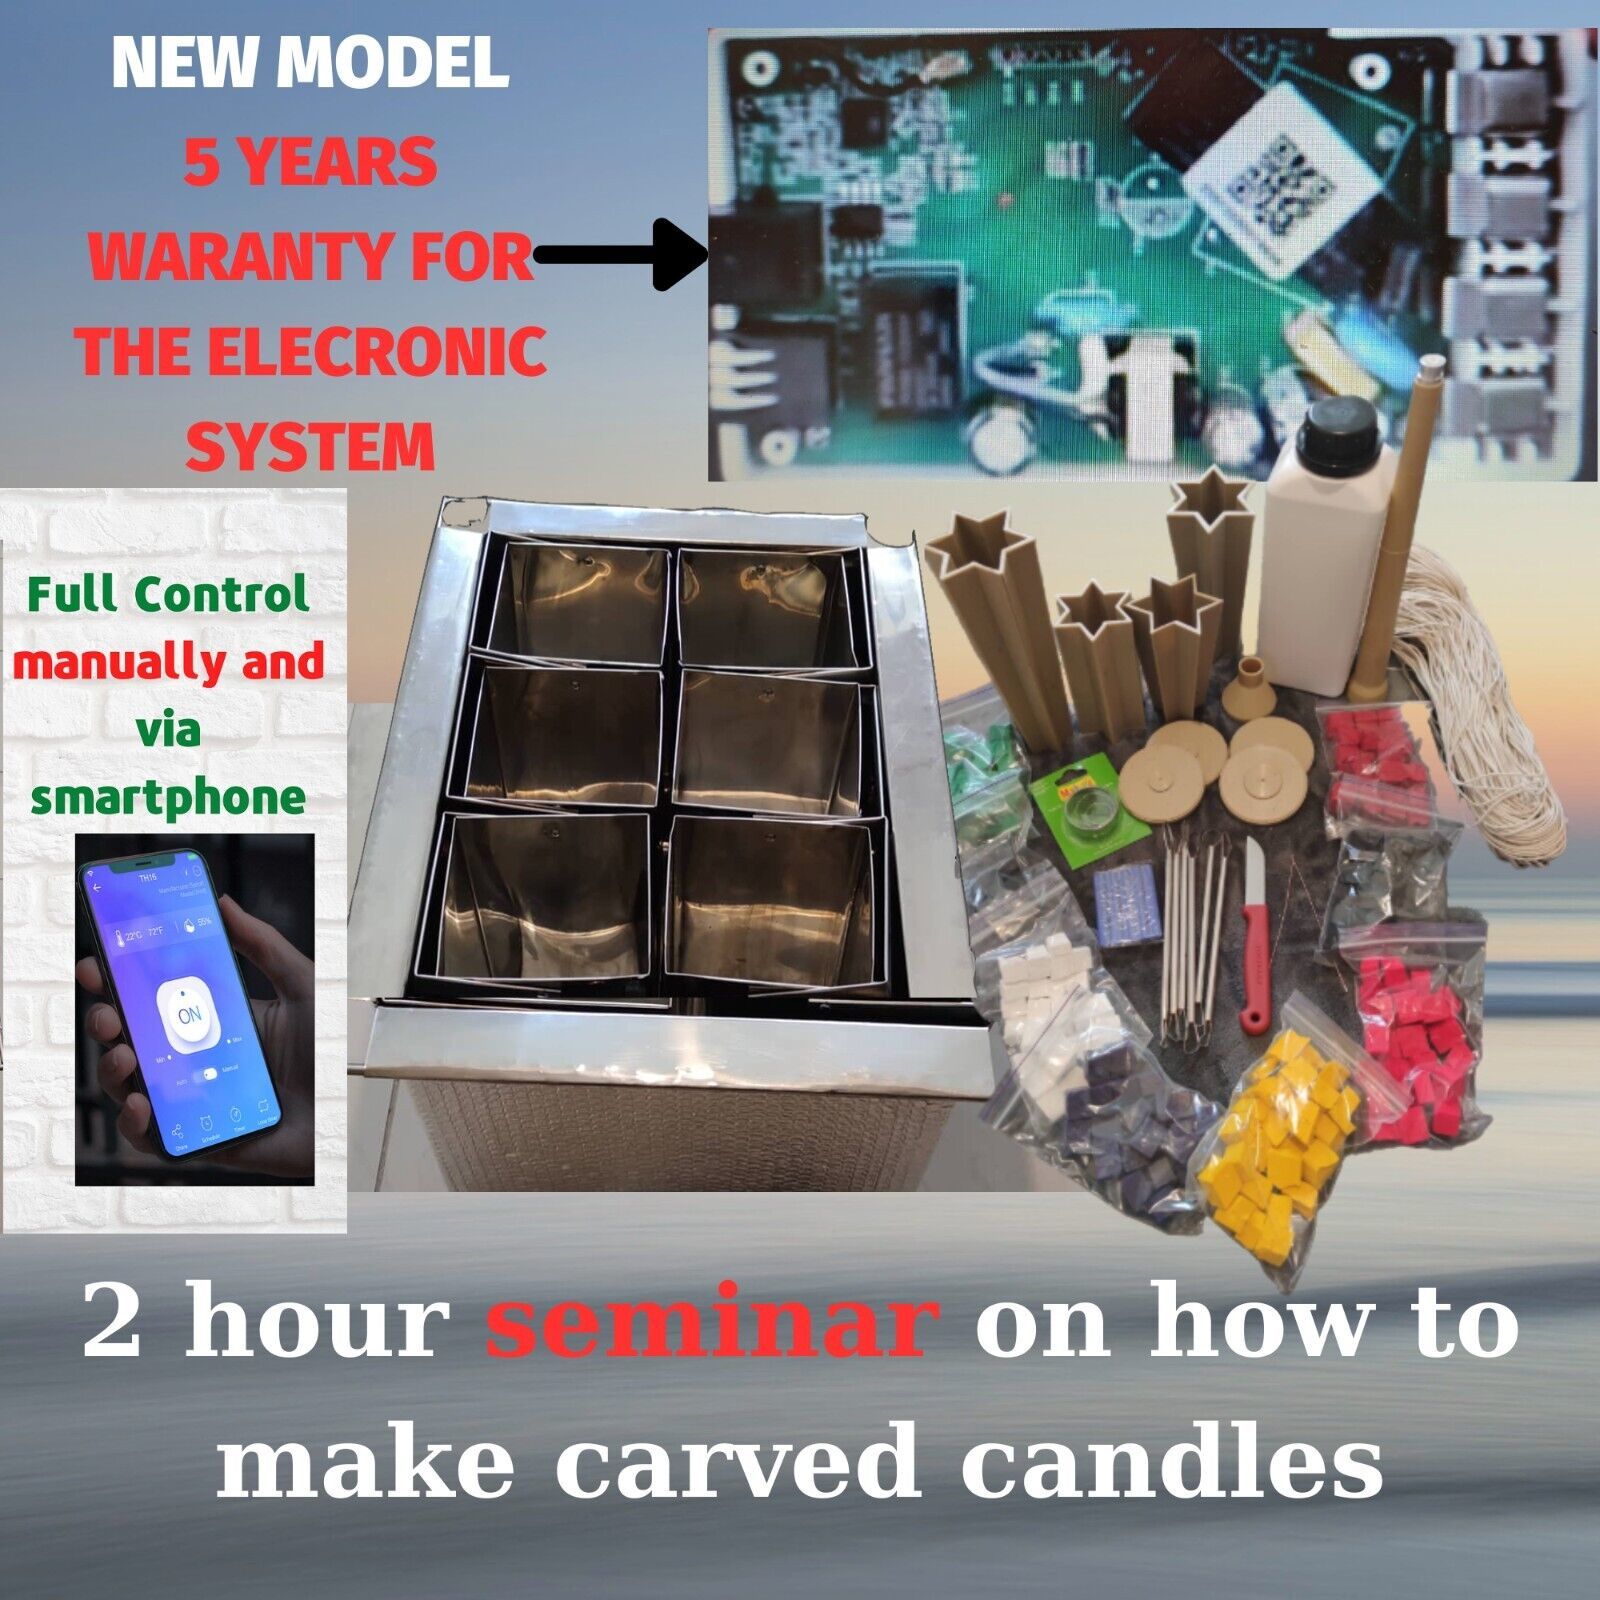 Carved Candles Wax Melter Machine Plus Materials 2 ours Seminar 6 buckets New - $1,200.00